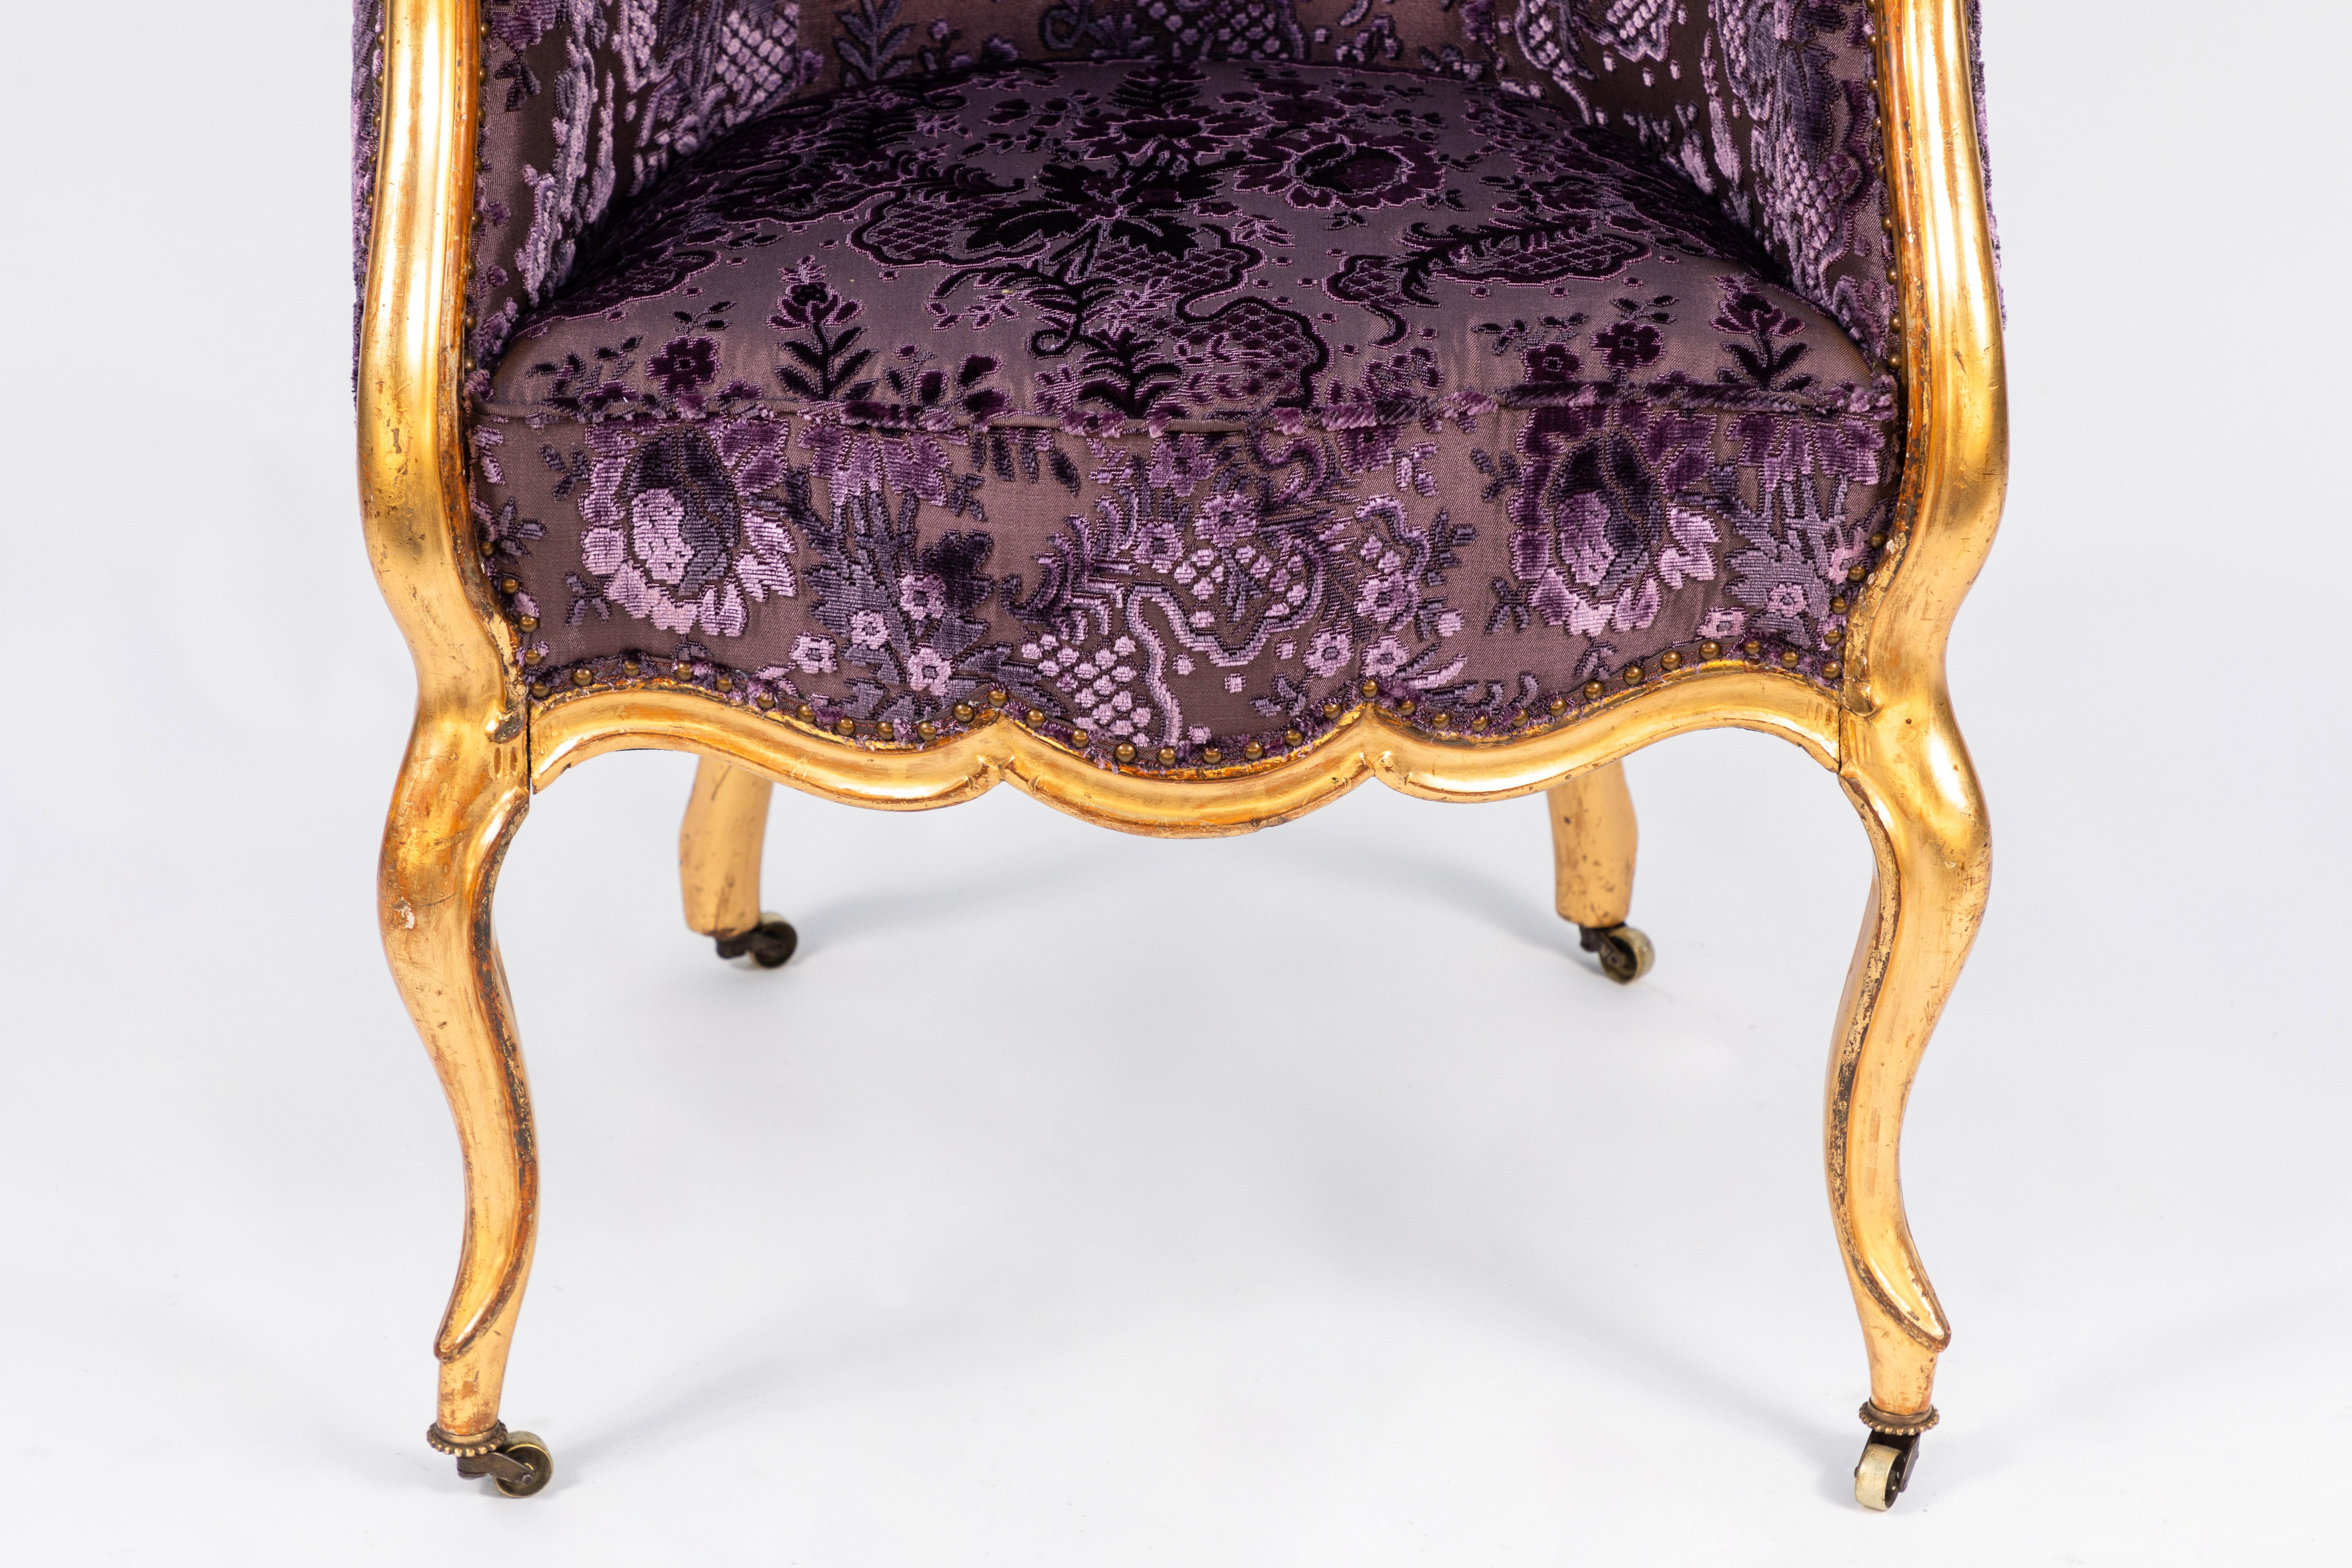 19th century Italian giltwood single armchair with finely carved details. Newly upholstered in bright purple velvet.